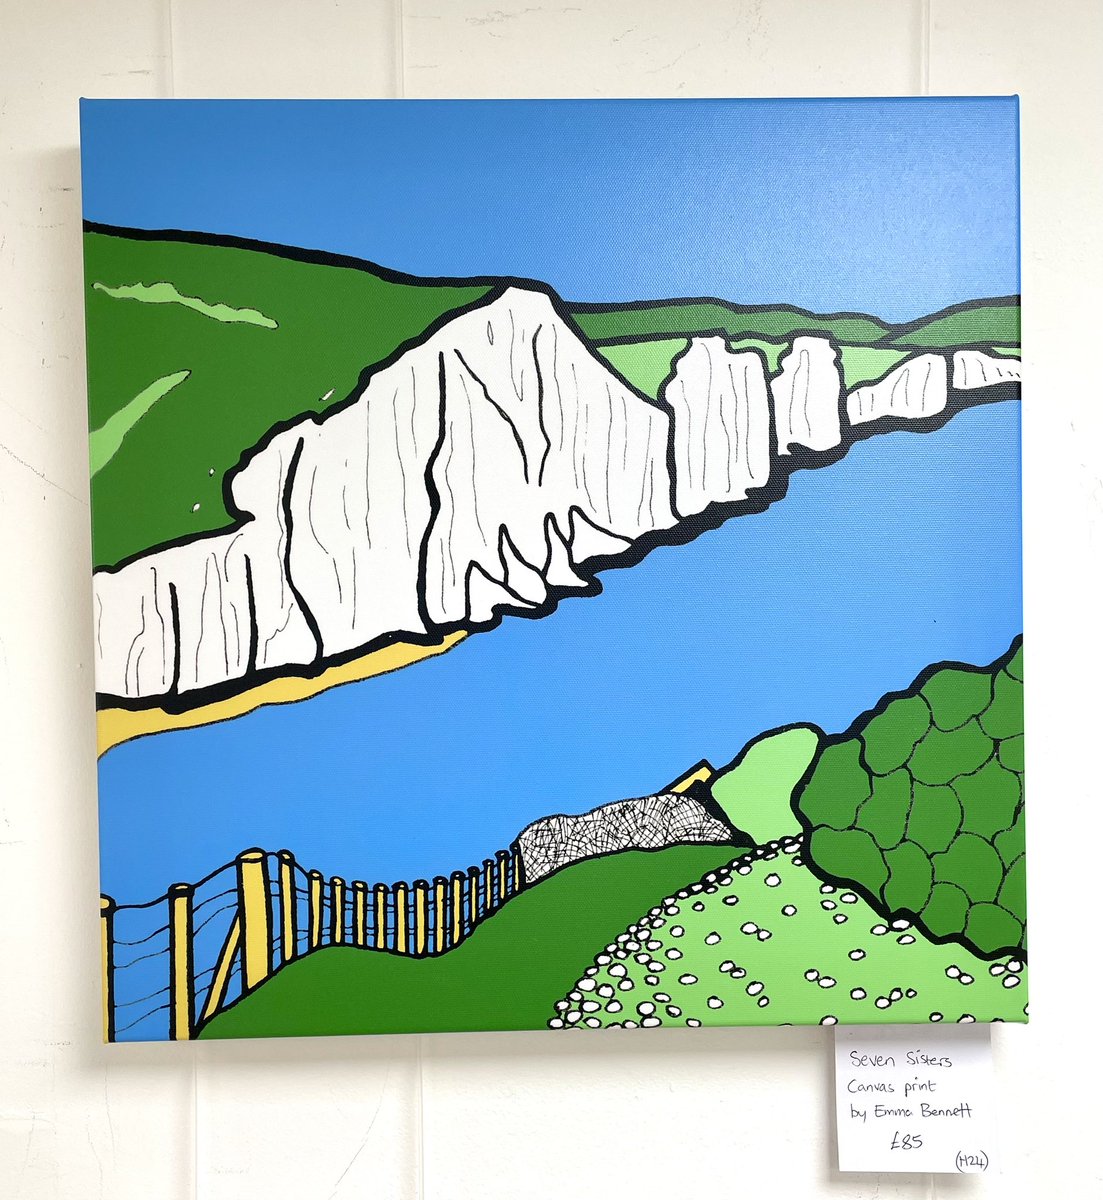 My new(ish) square canvas of #SevenSisters is on the gallery wall.